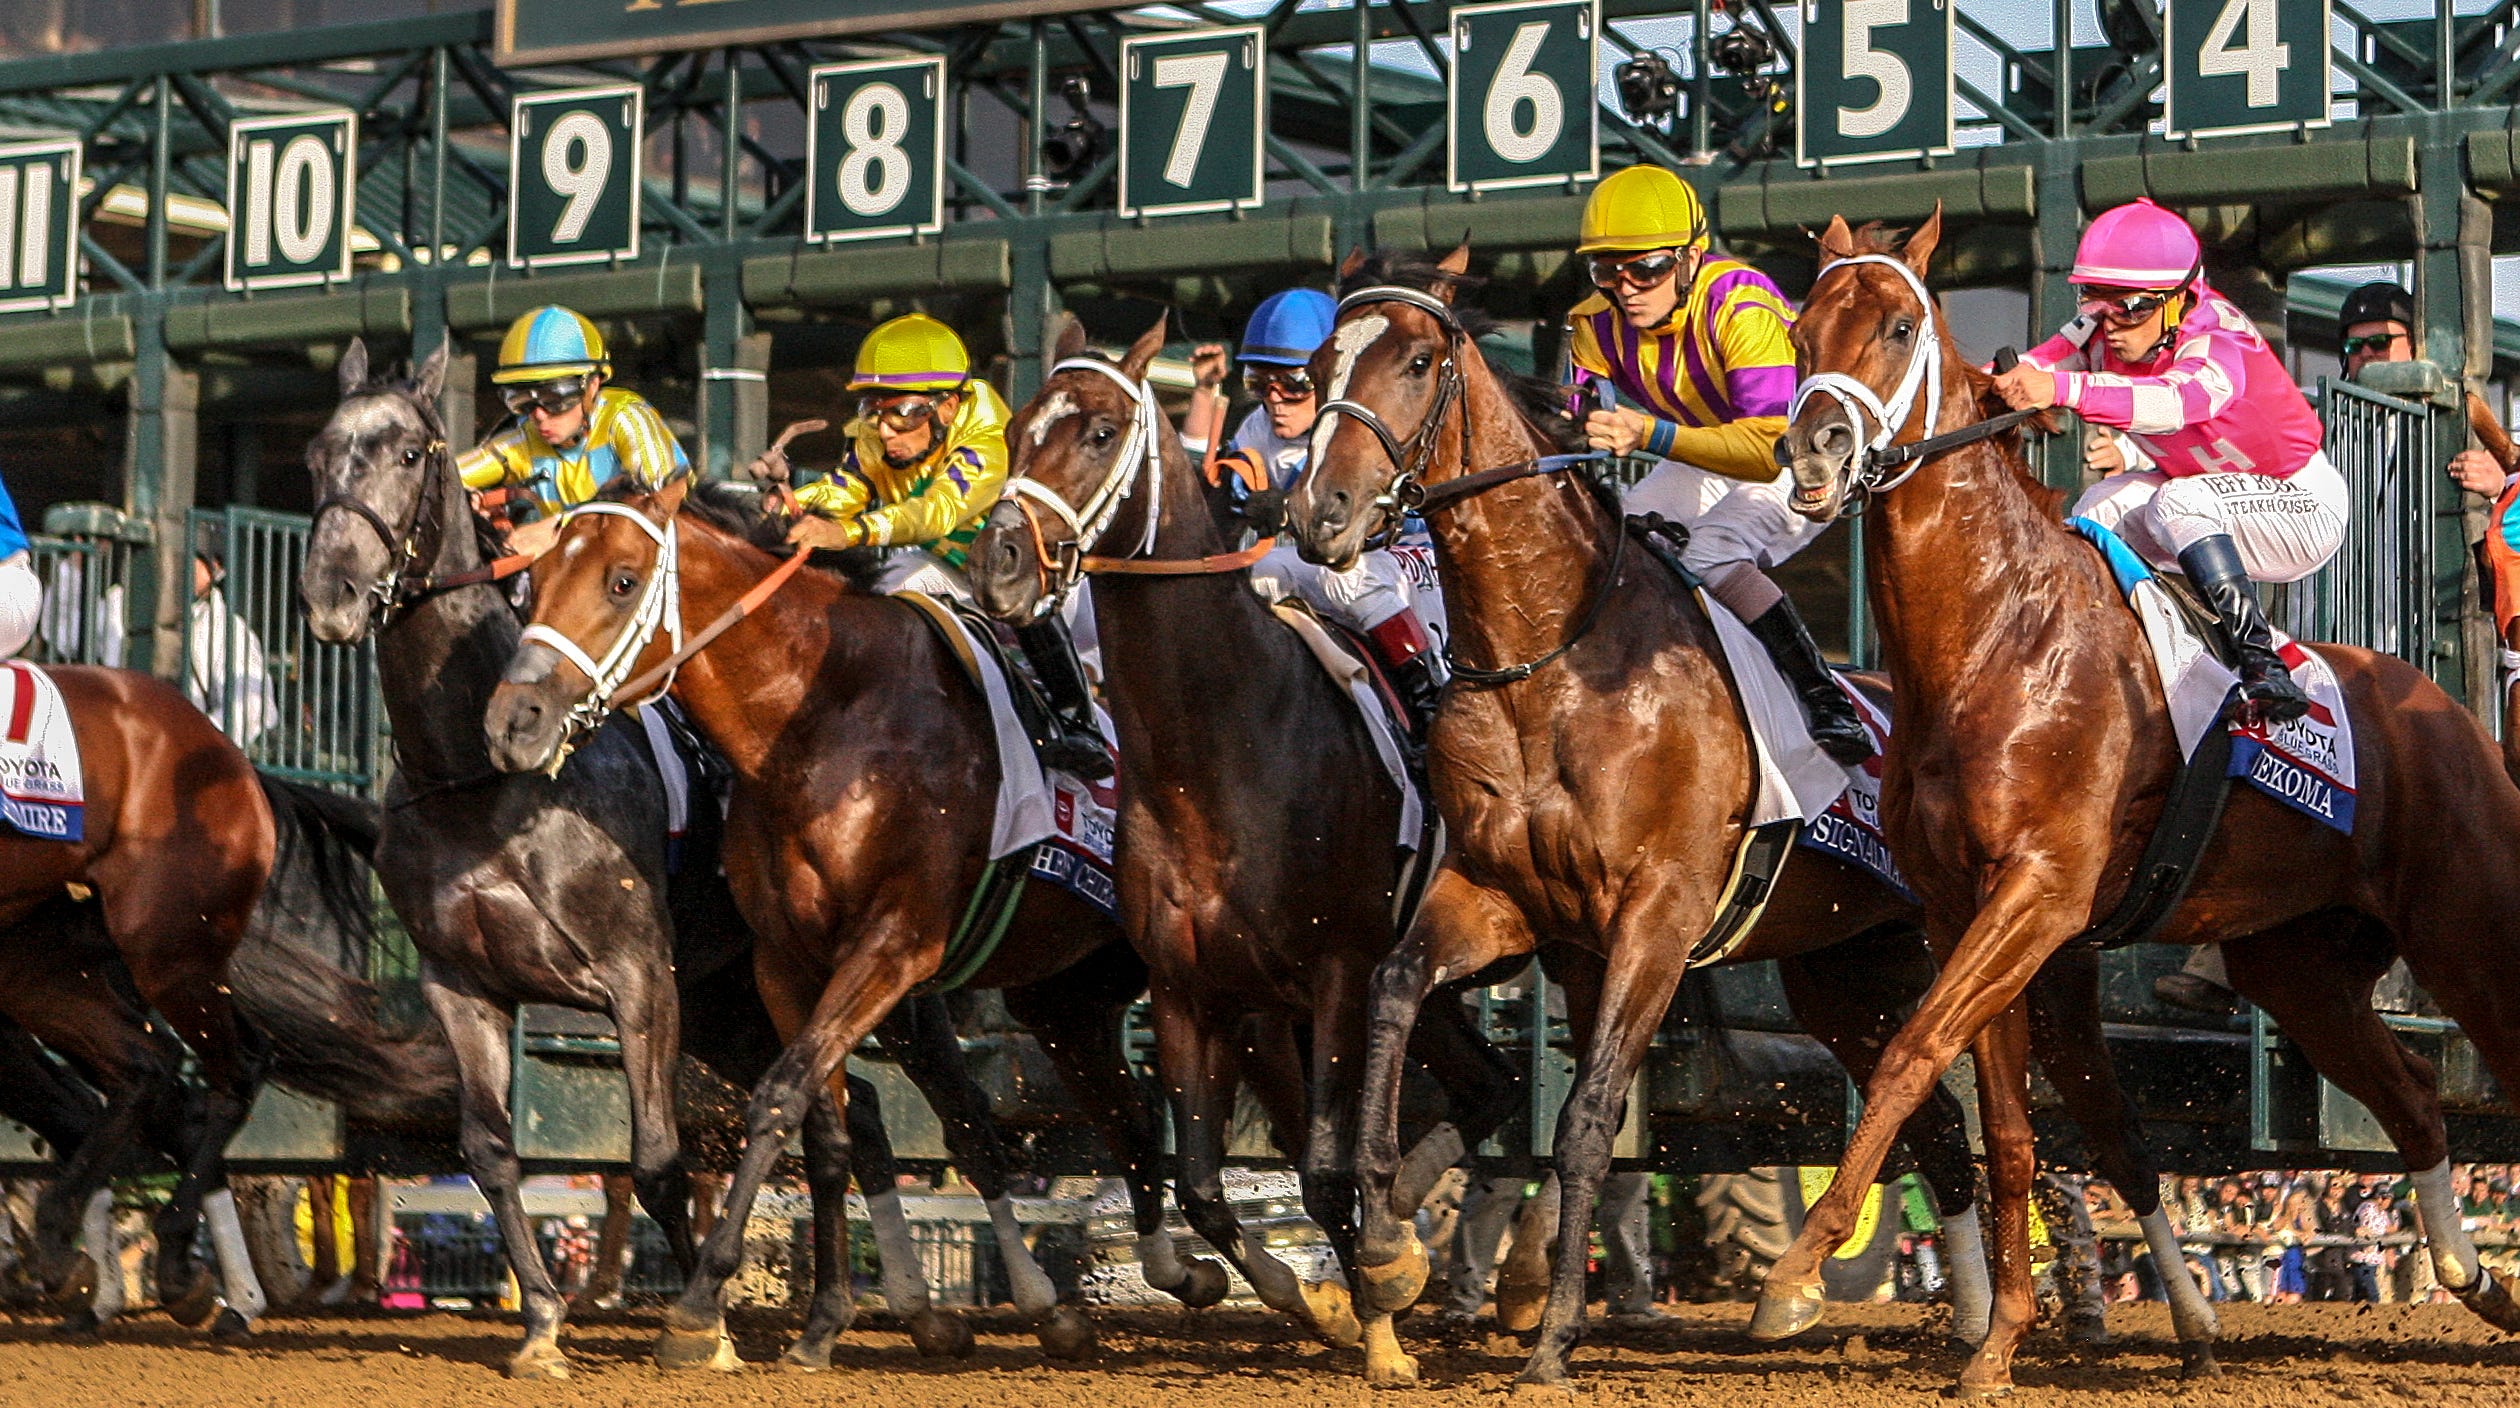 Kentucky Derby preps races New points races unveiled for Sept. 5 race